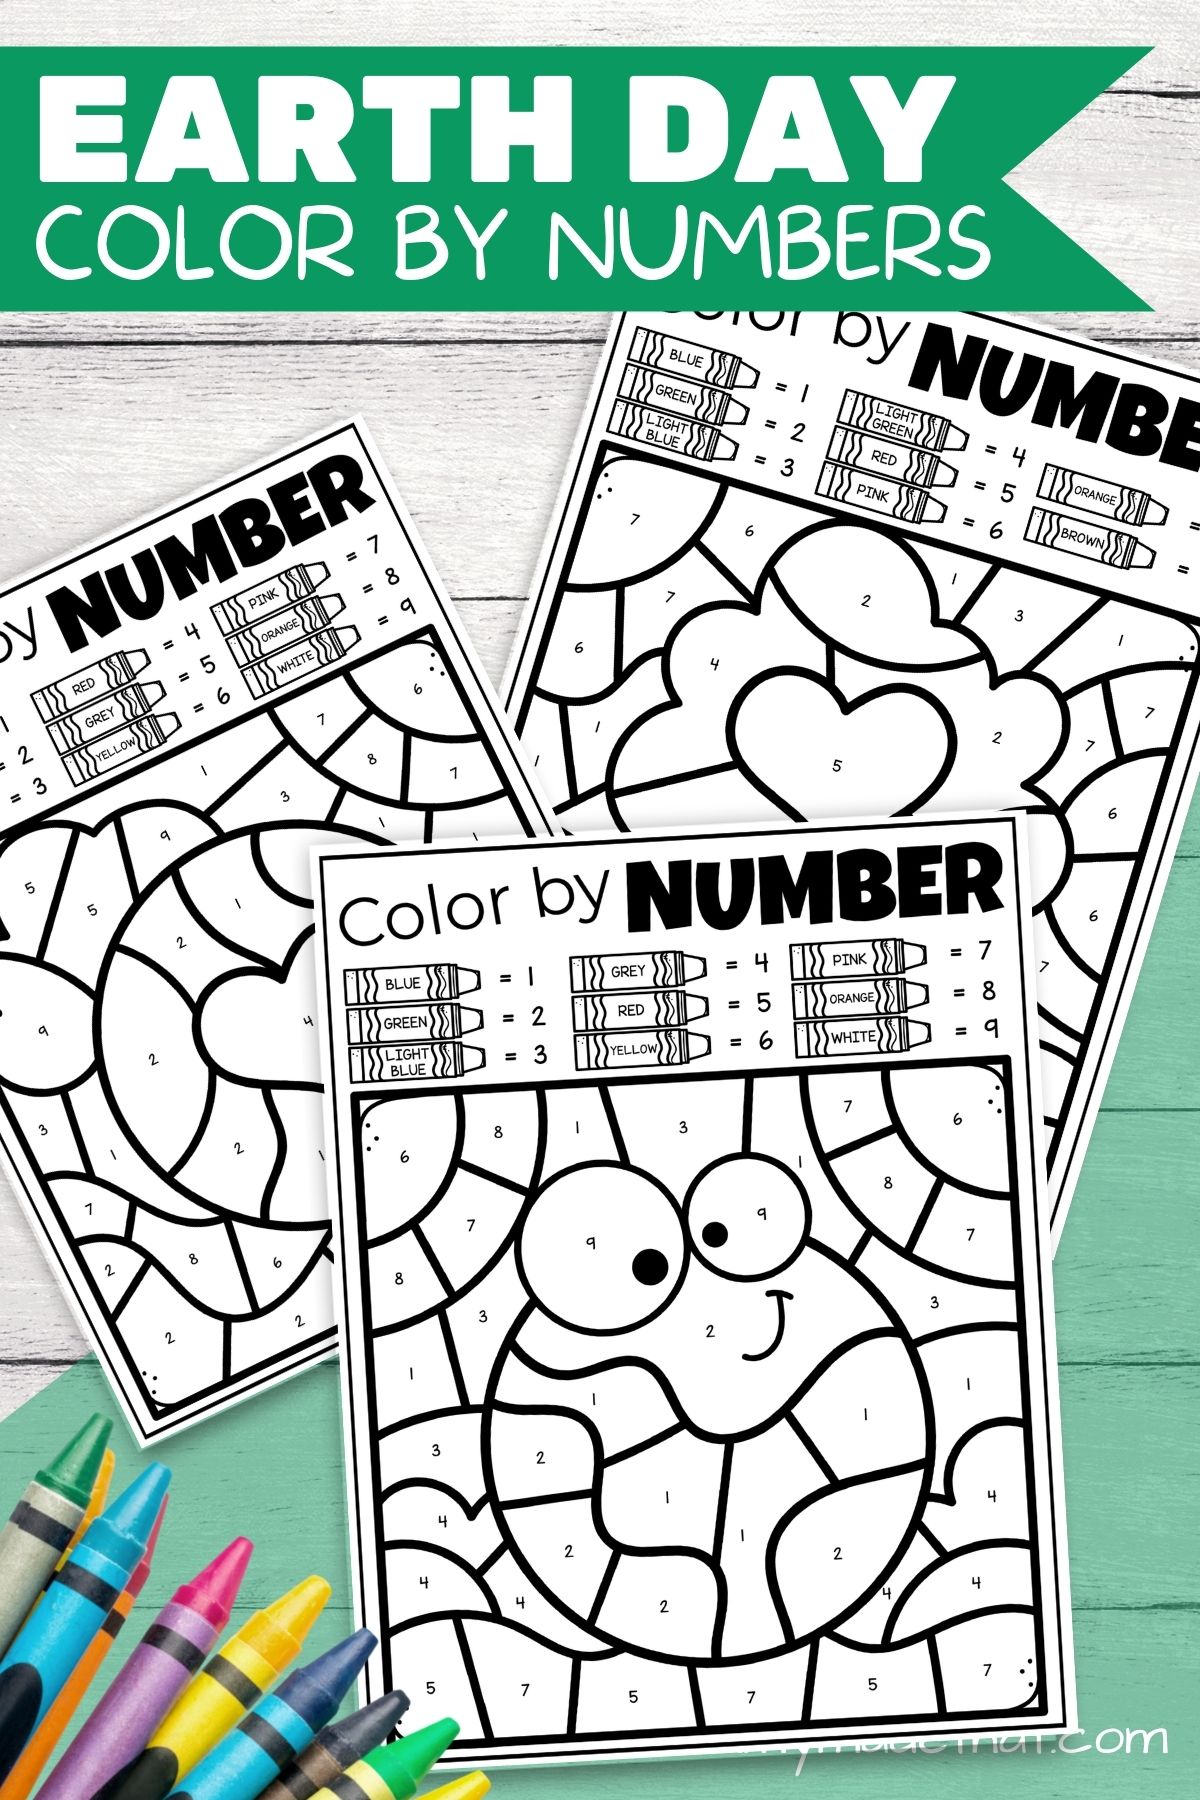 Earth Day Color By Number (Free printables!)